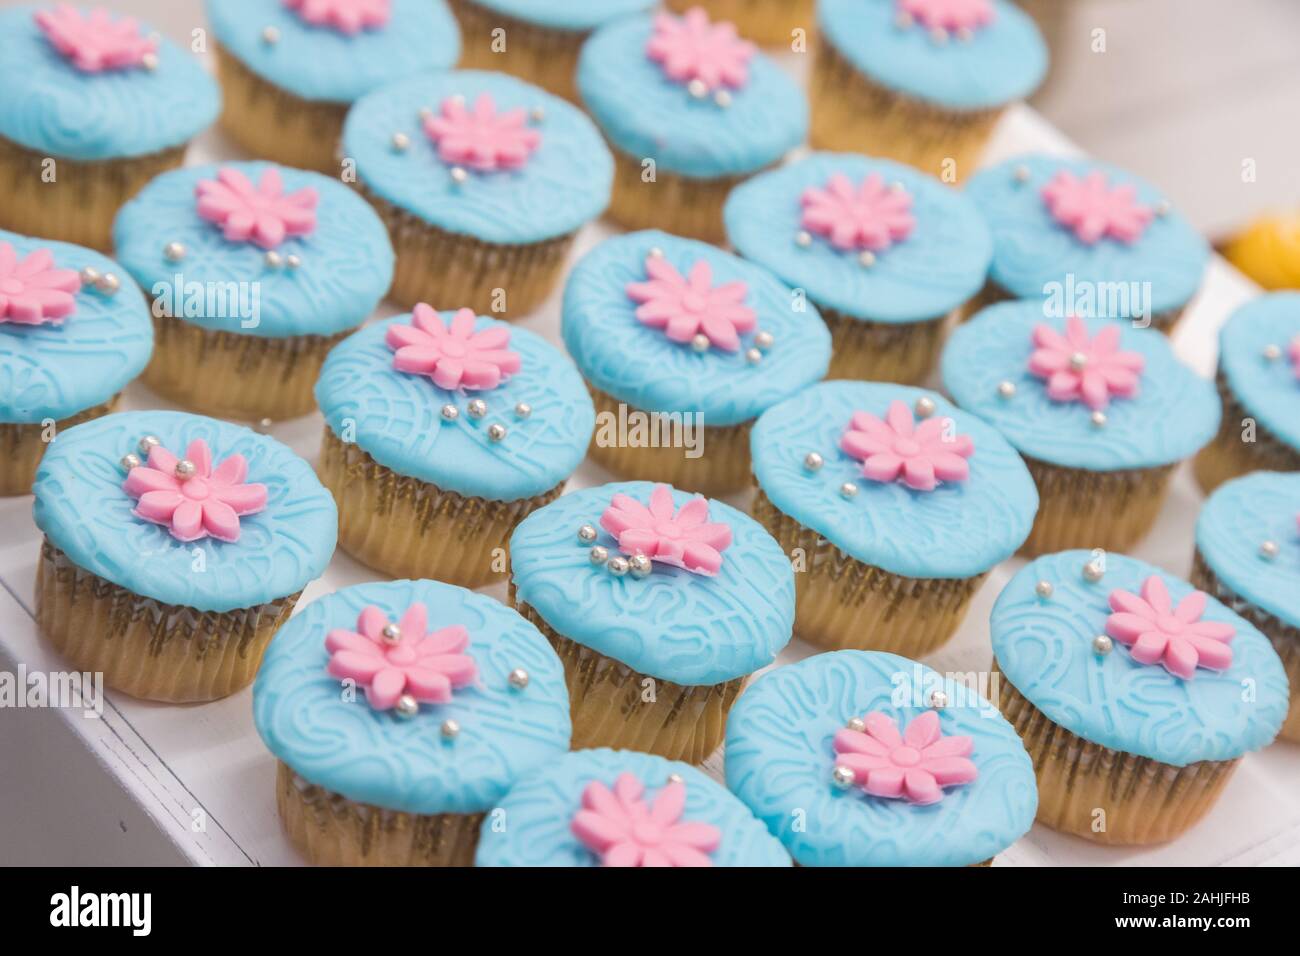 cupcakes with different topping, it have sofe blue cream flat on top and some snack like flower with mini ball. they're all put together in pattern Stock Photo